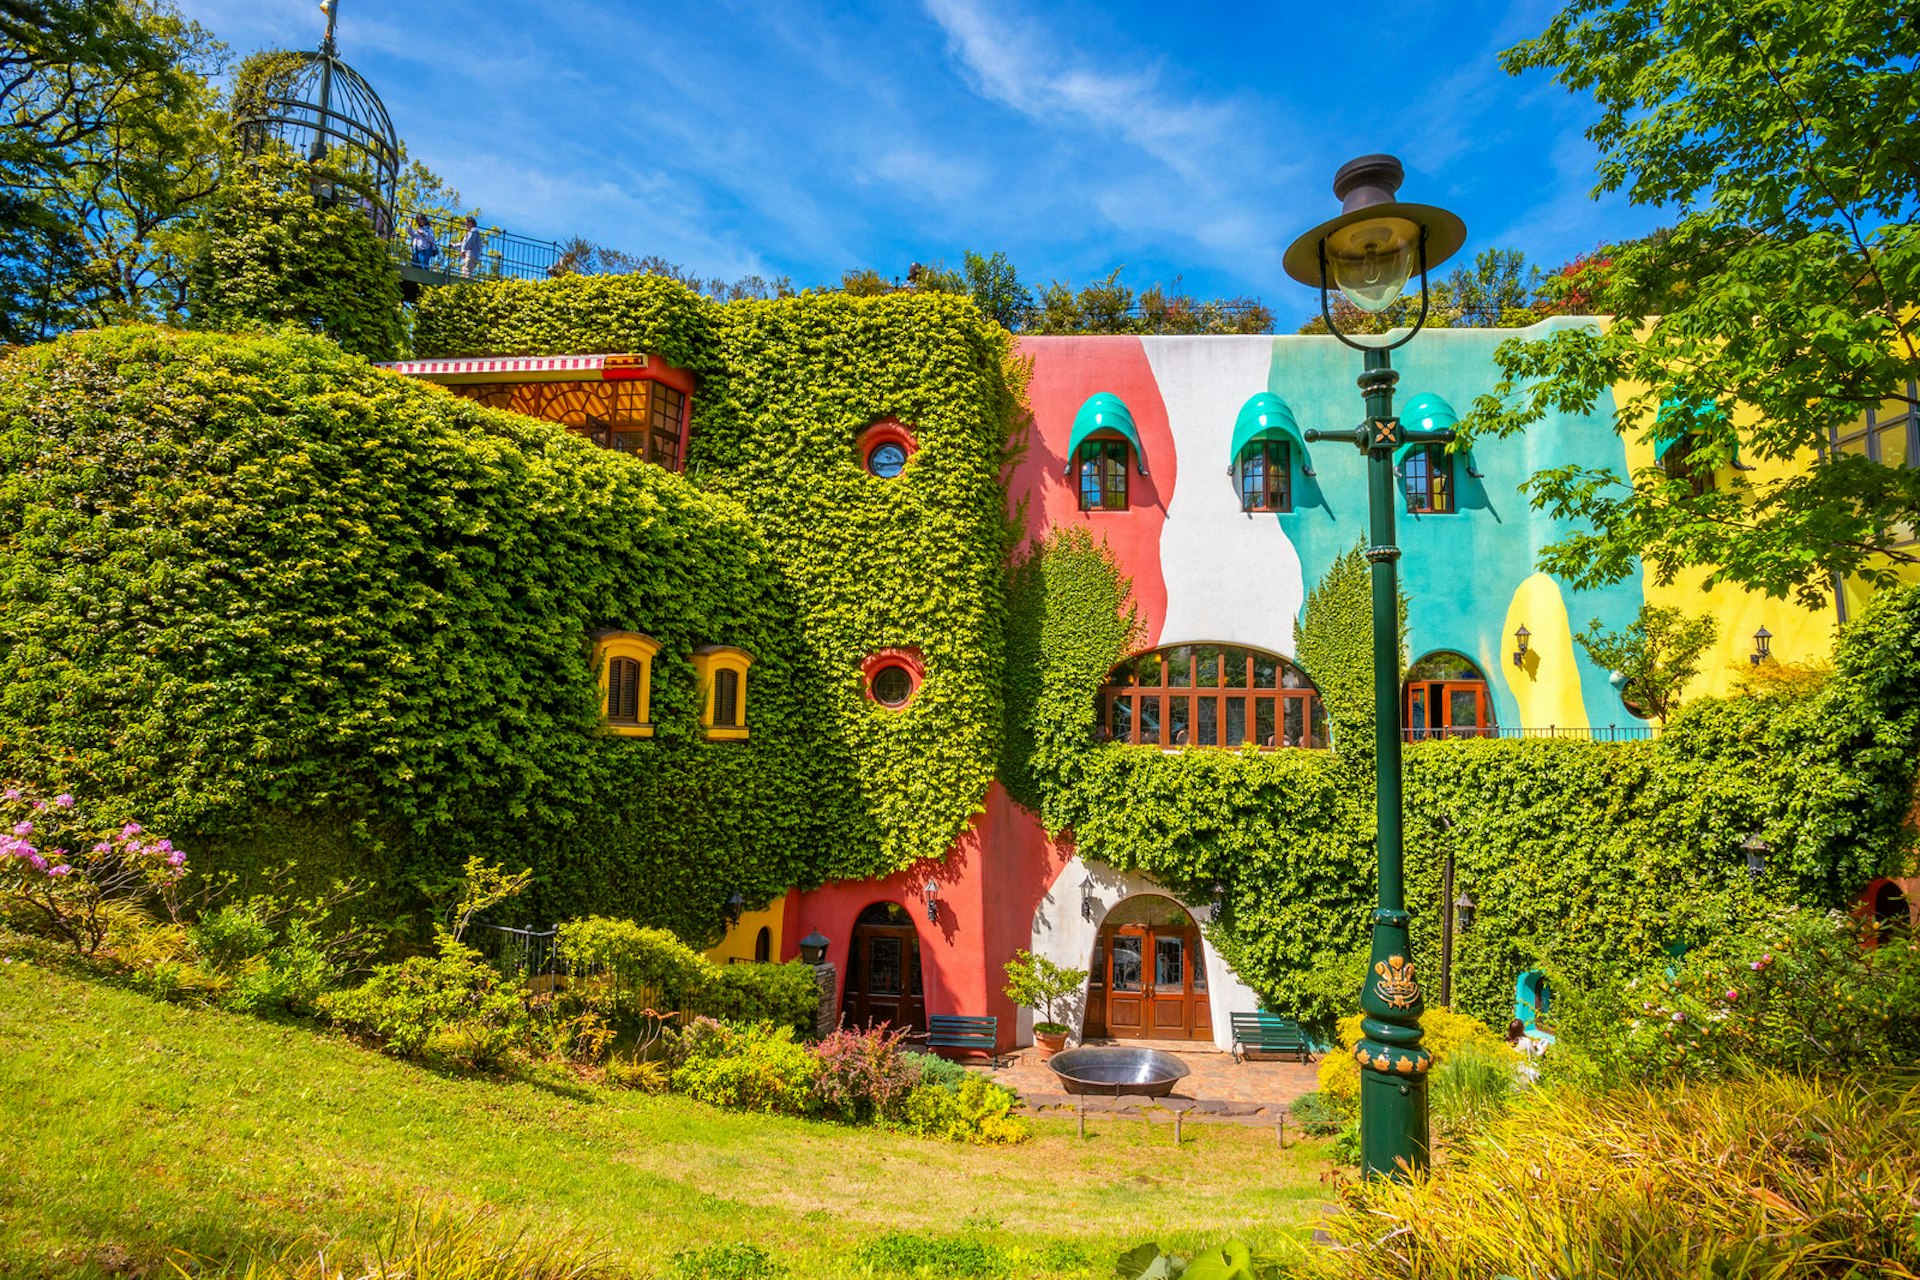 The foliage-clad, brightly coloured exterior of the Ghibli Museum in Tokyo, Japan. The museum is almost completely covered in ivy, the walls that are visible are painted red, white, green and yellow. The windows also have green shades over them and there is a green lamp post in the foreground. 